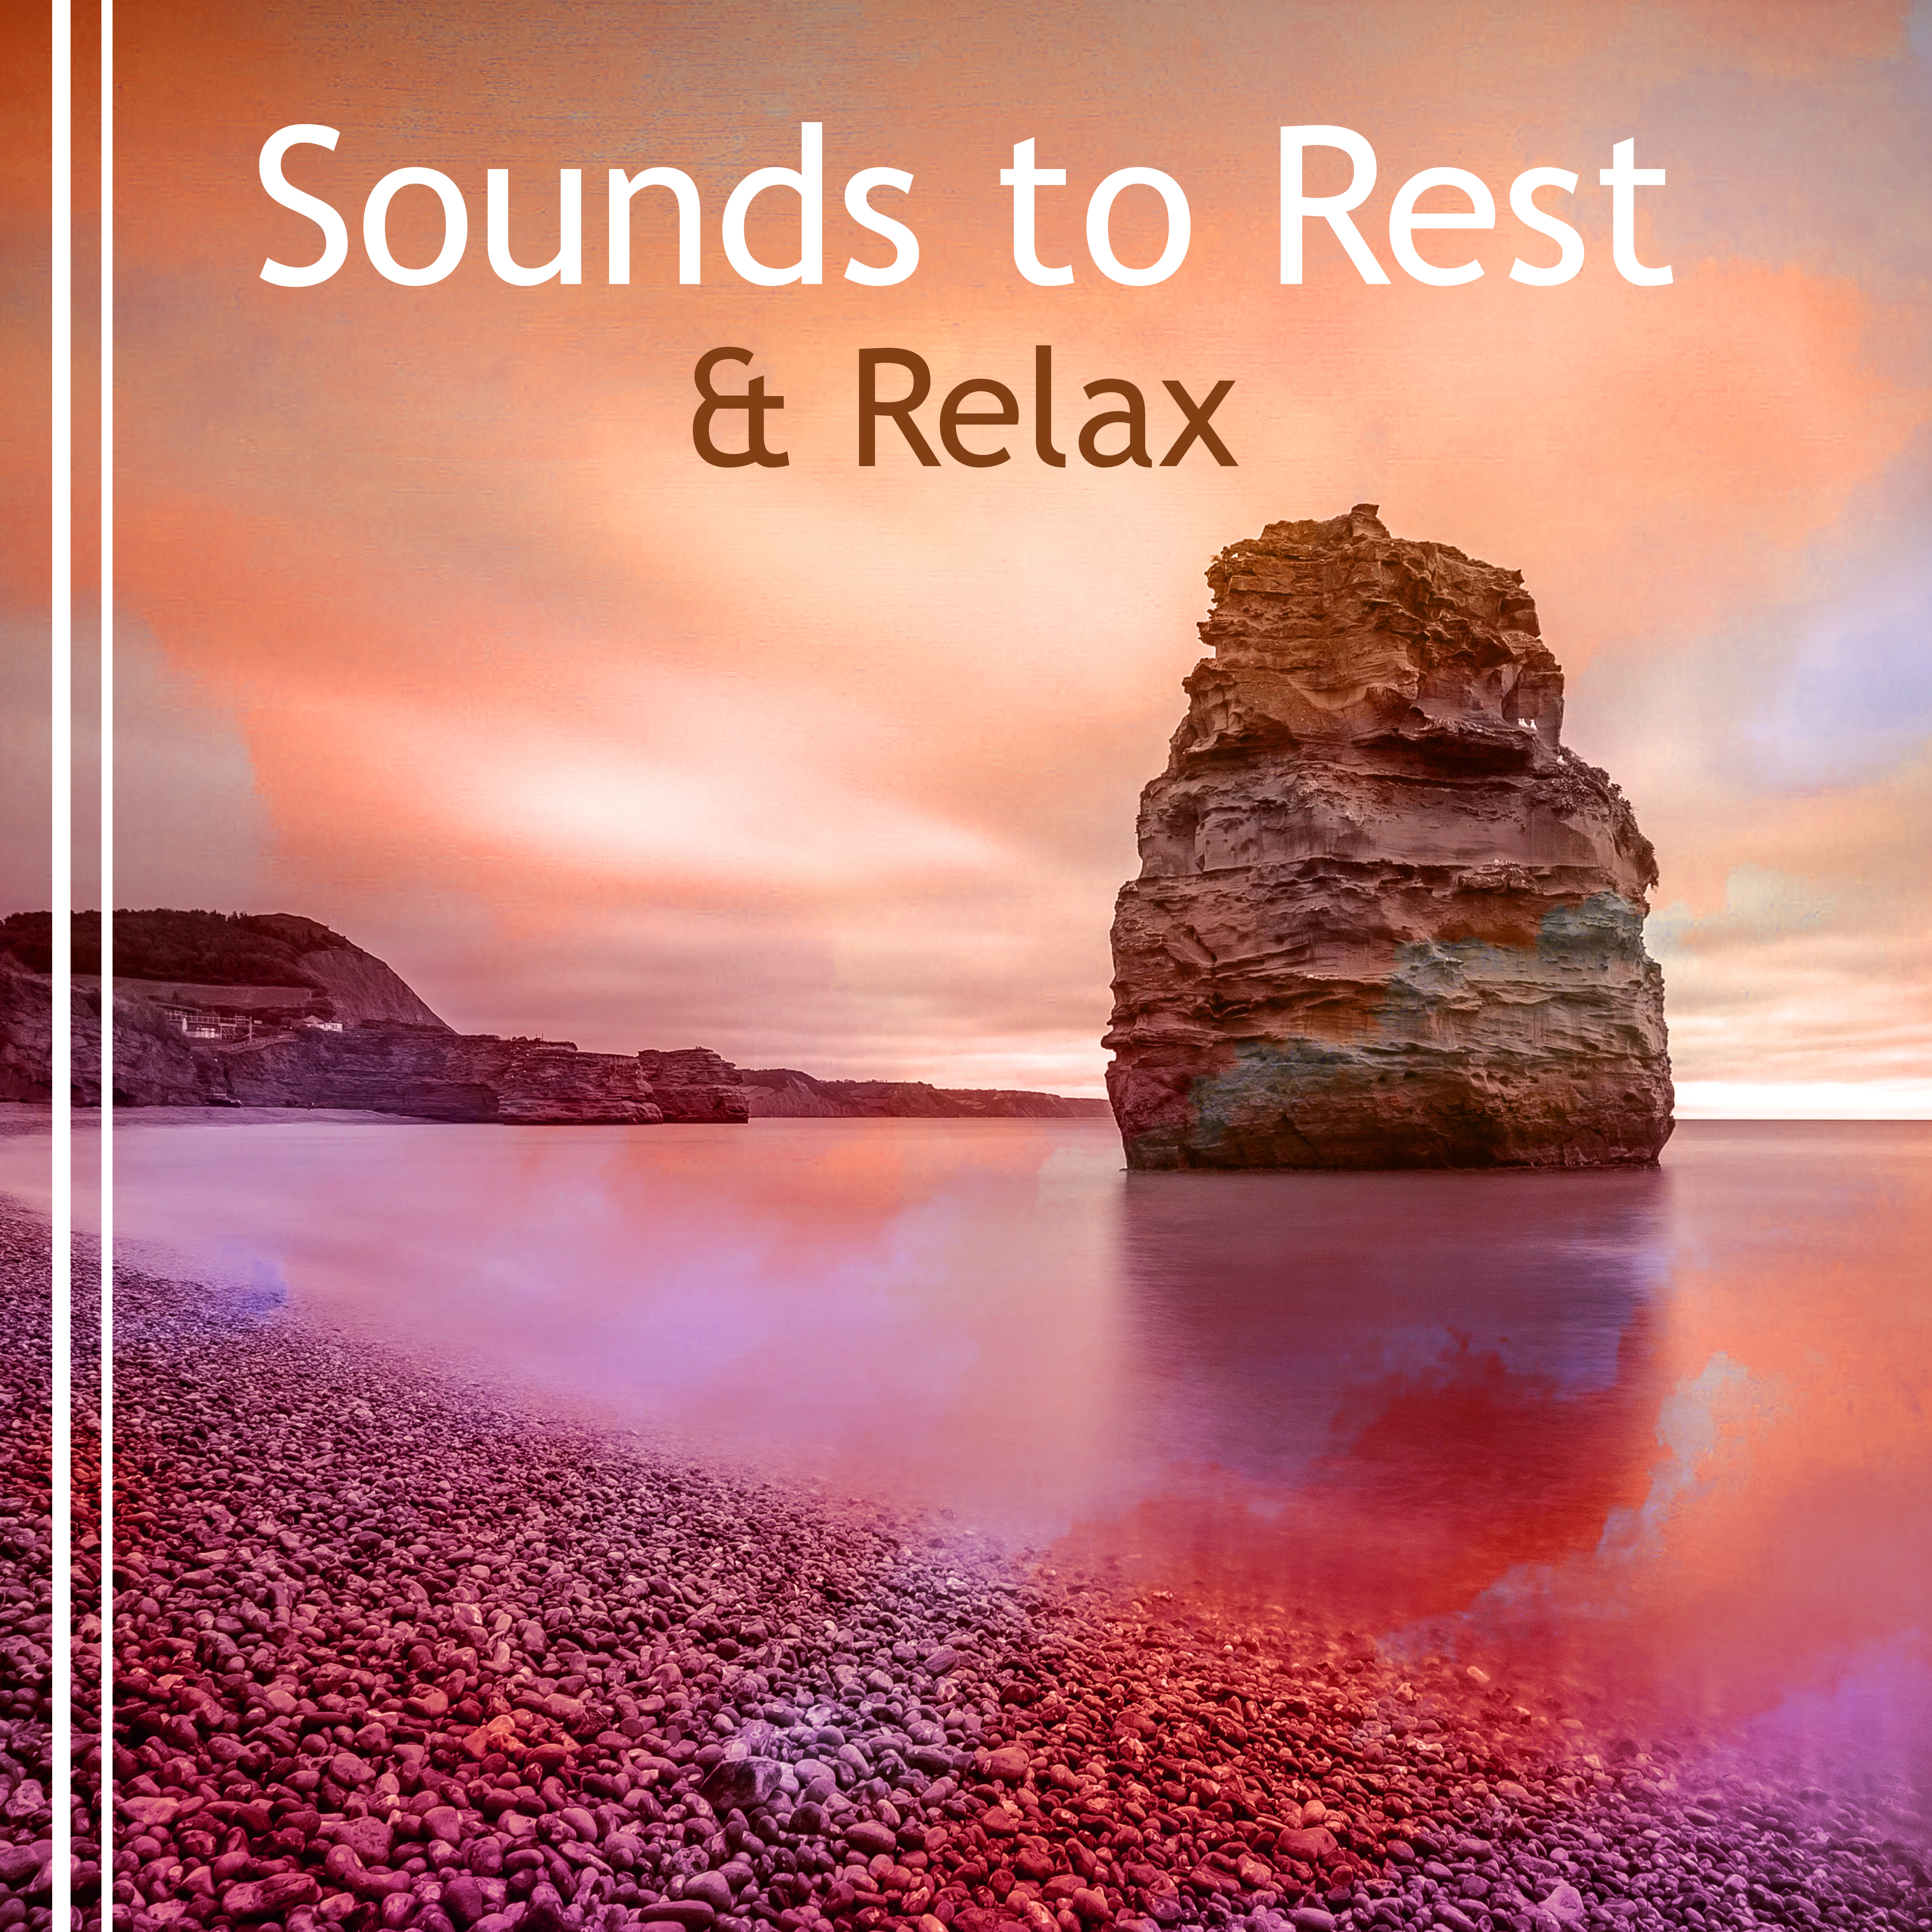 Sounds to Rest & Relax – New Age to Calm Down, Soothing Sounds to Relax, Peaceful Waves, Healing Therapy